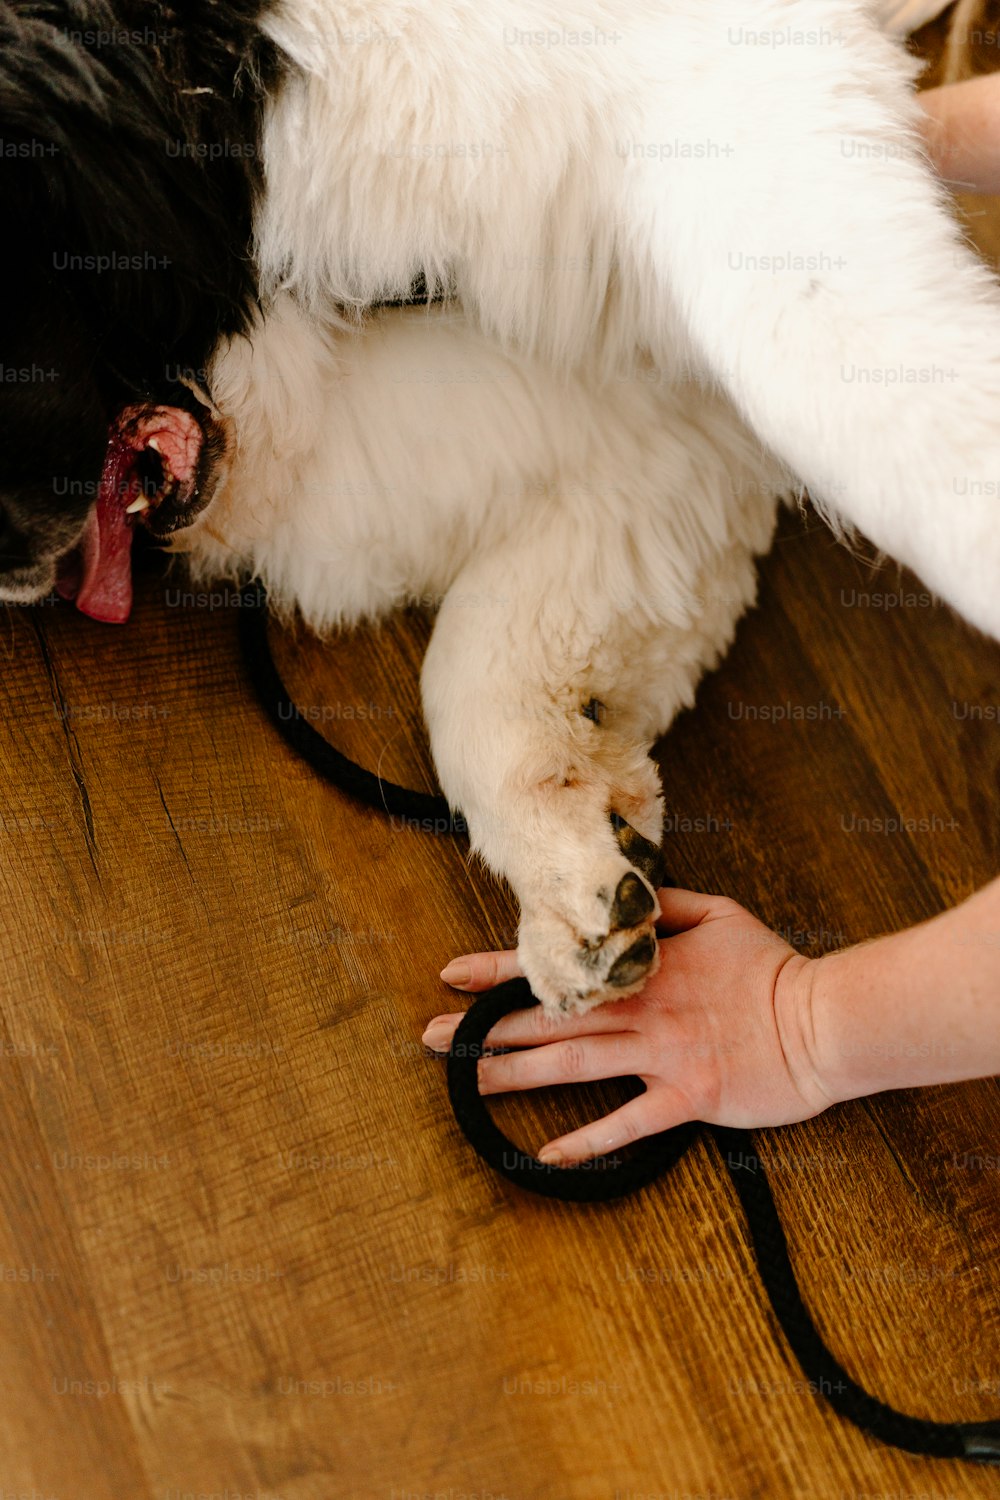 a dog laying on a wooden floor being held by a person's hand